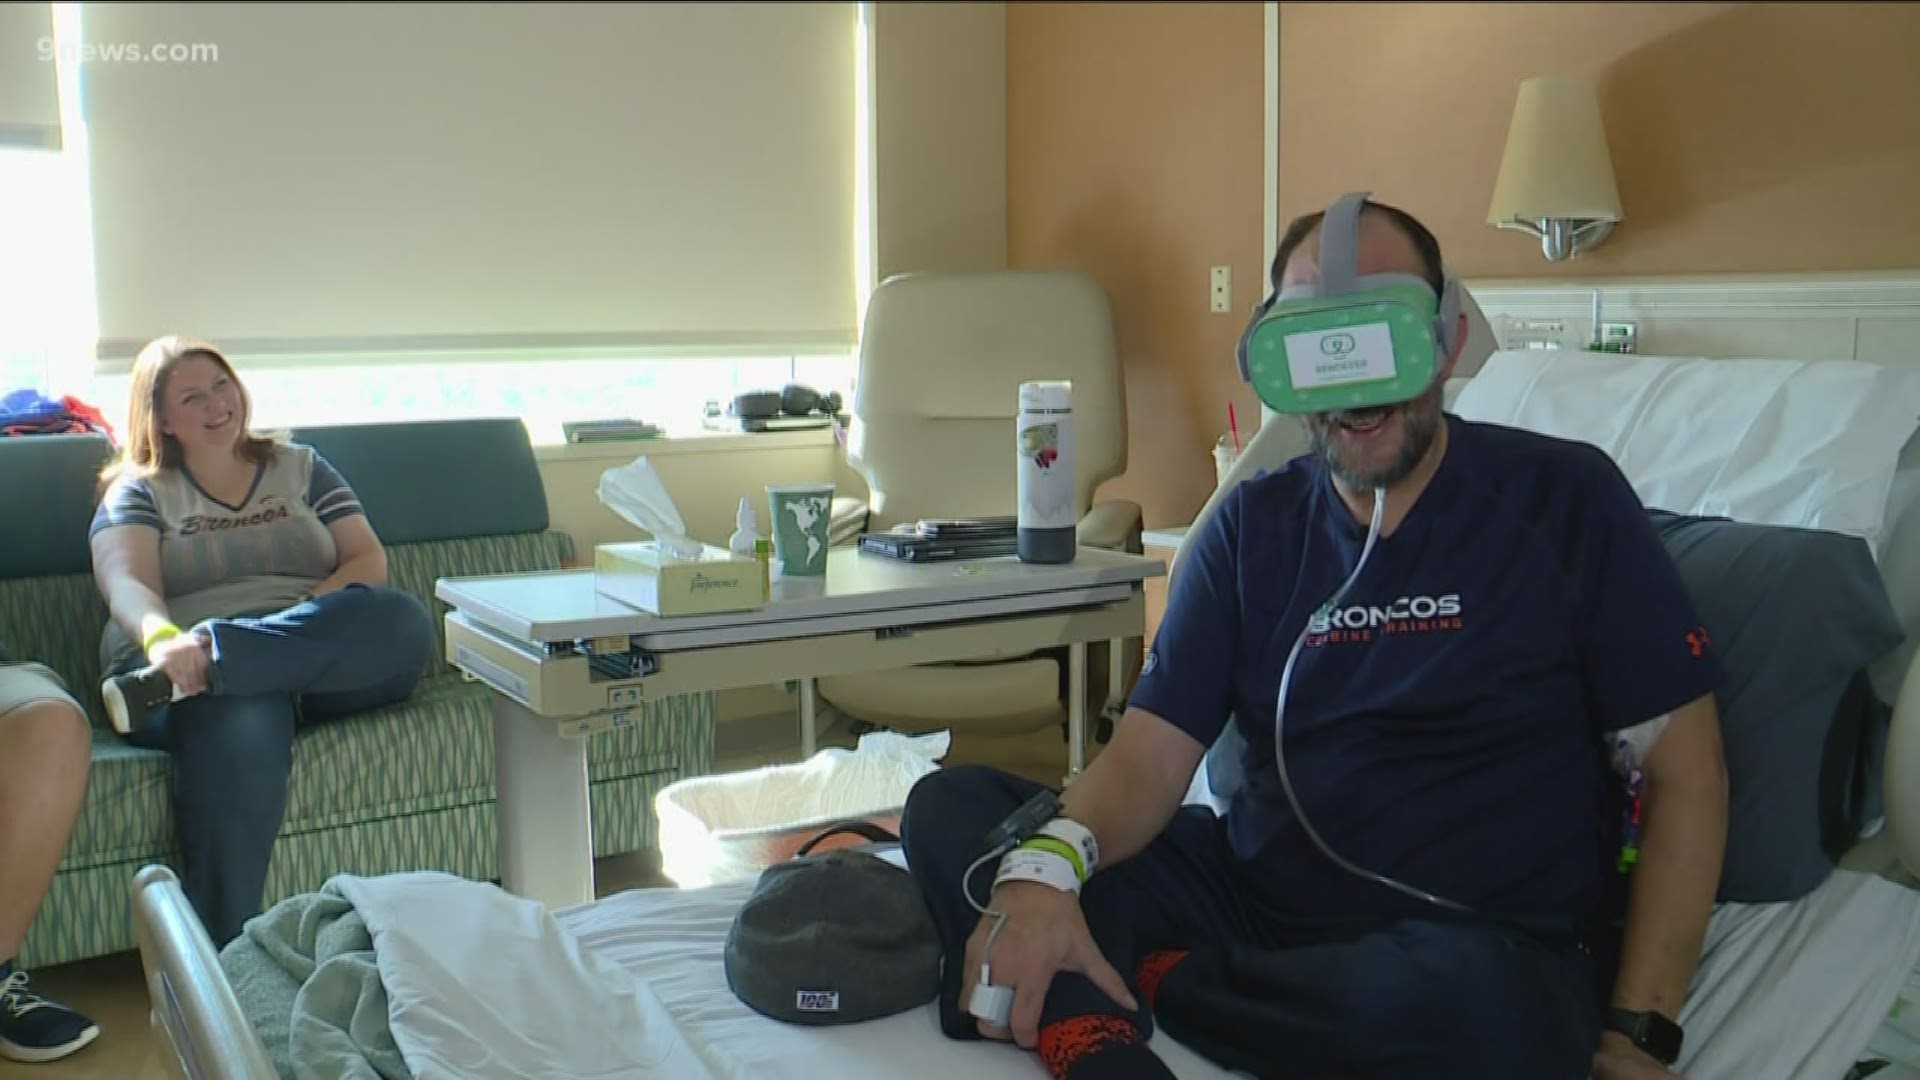 Patients at UCHealth facilities across Colorado can now get a front row seat at Empower Field at Mile High through virtual reality technology.